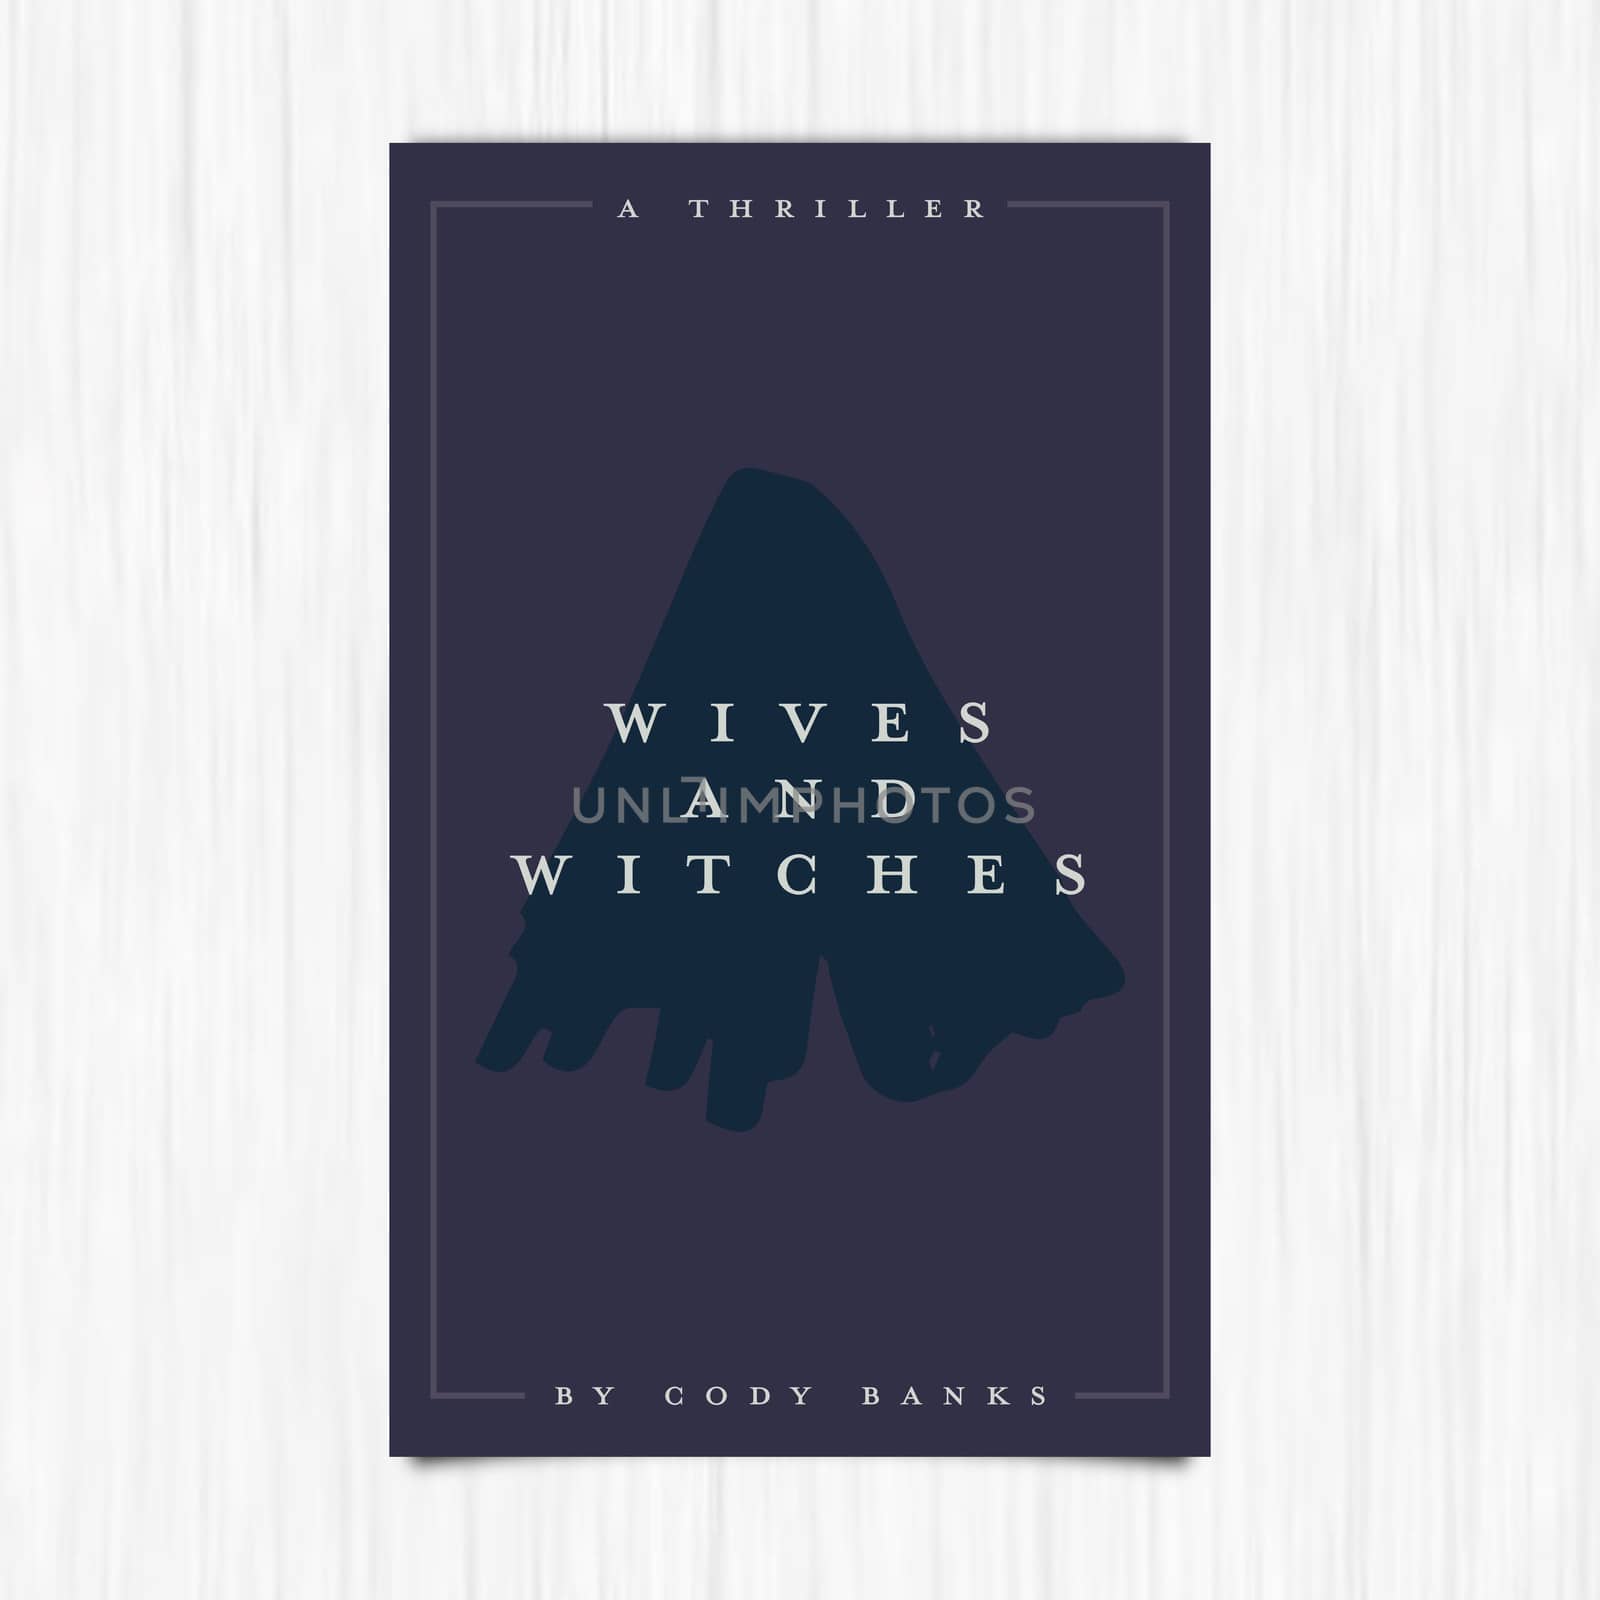 Vector of novel cover with wives and witches text against white background